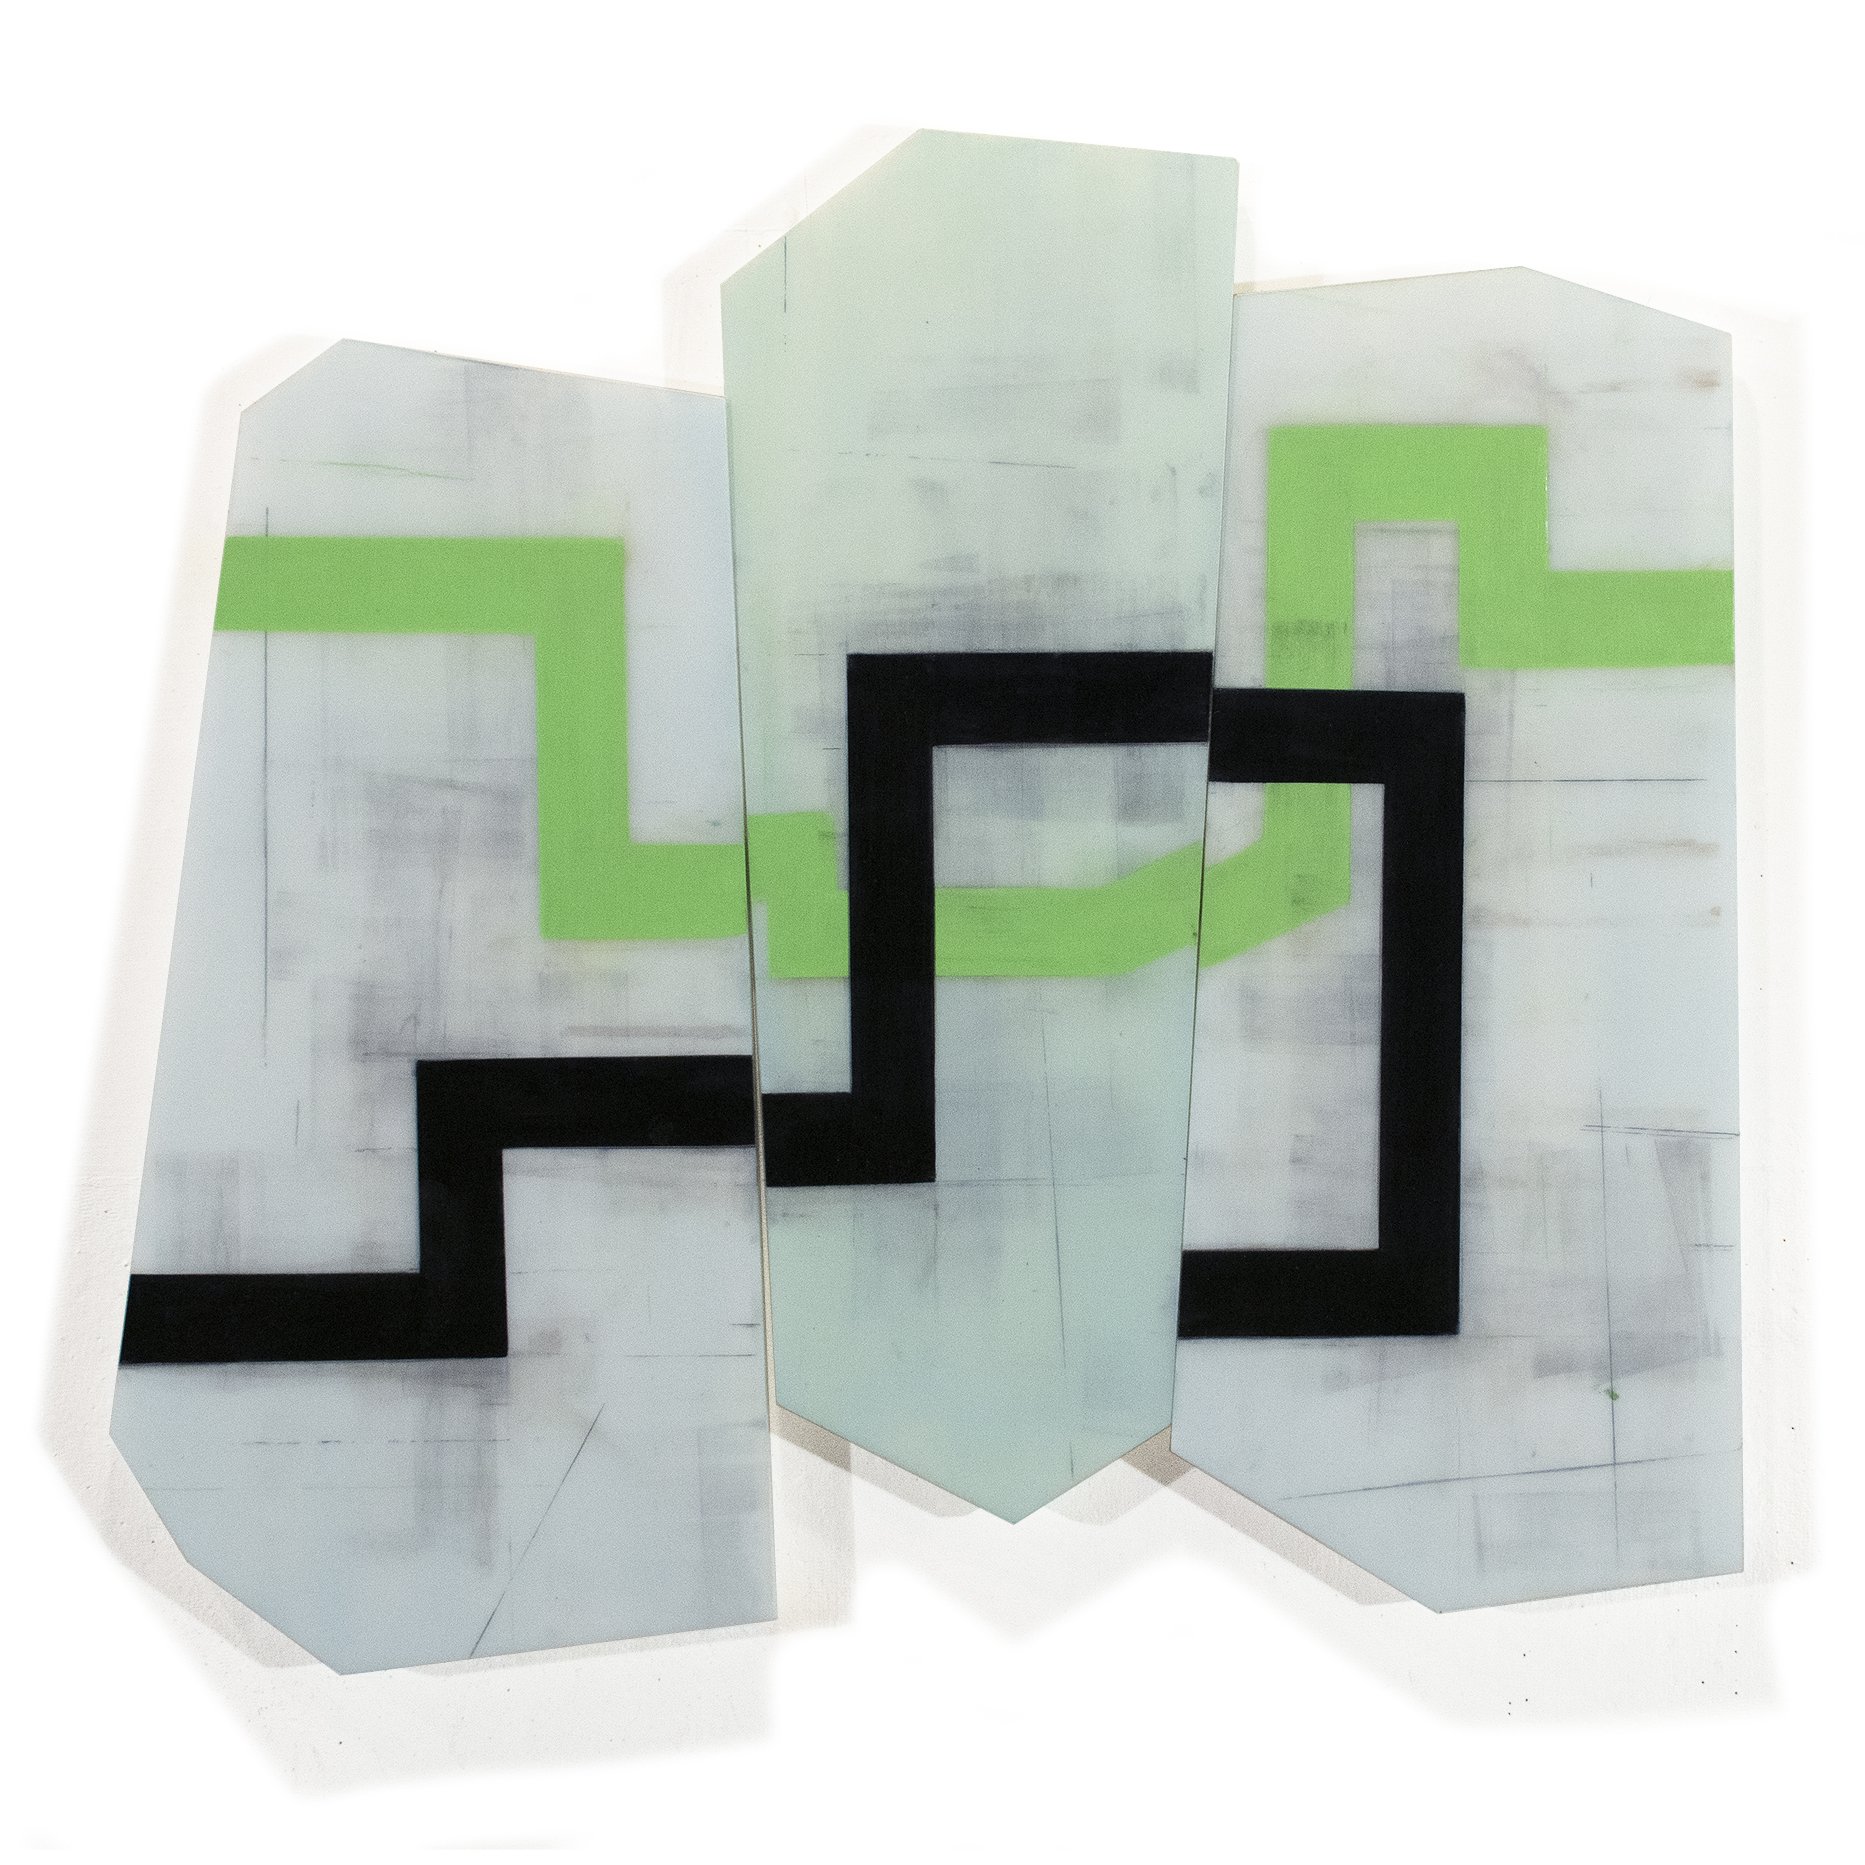 DYS/JUNCTURES K11 | 23 x 25 inches / 58 x 64 cm, acrylic, oil on 3 plexi panels, 2022